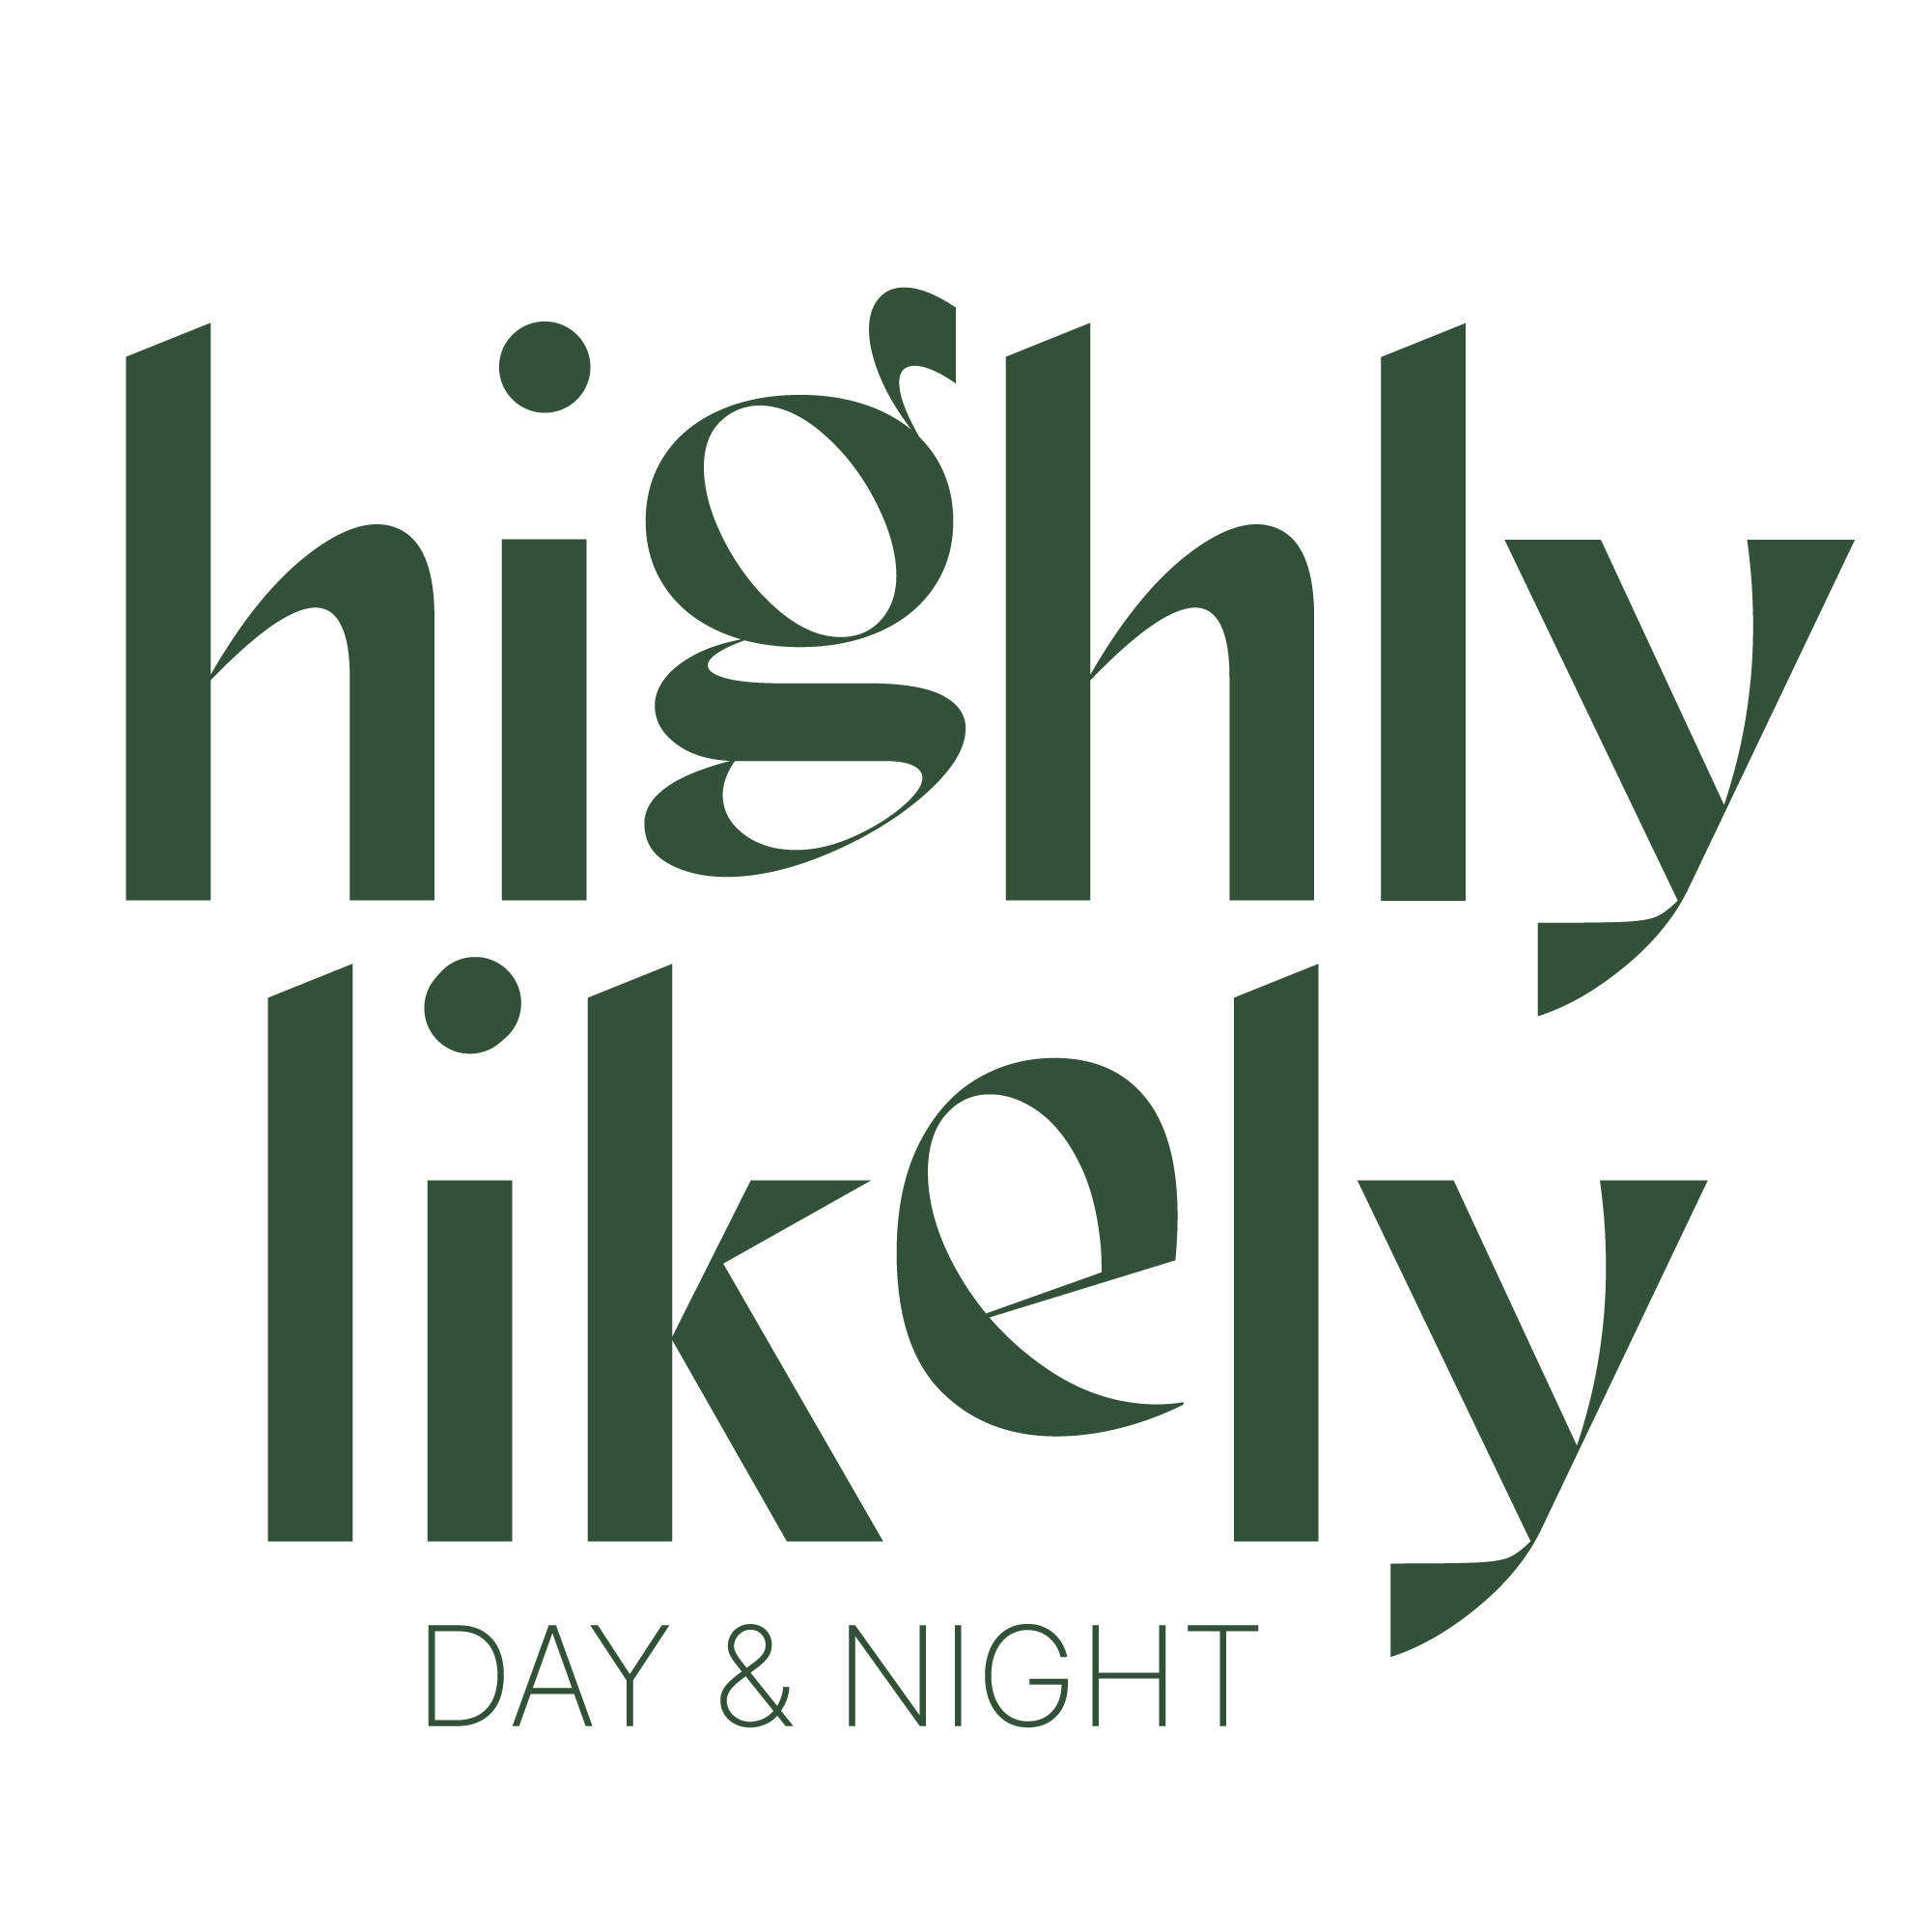 HighlyLikely_Logo.png